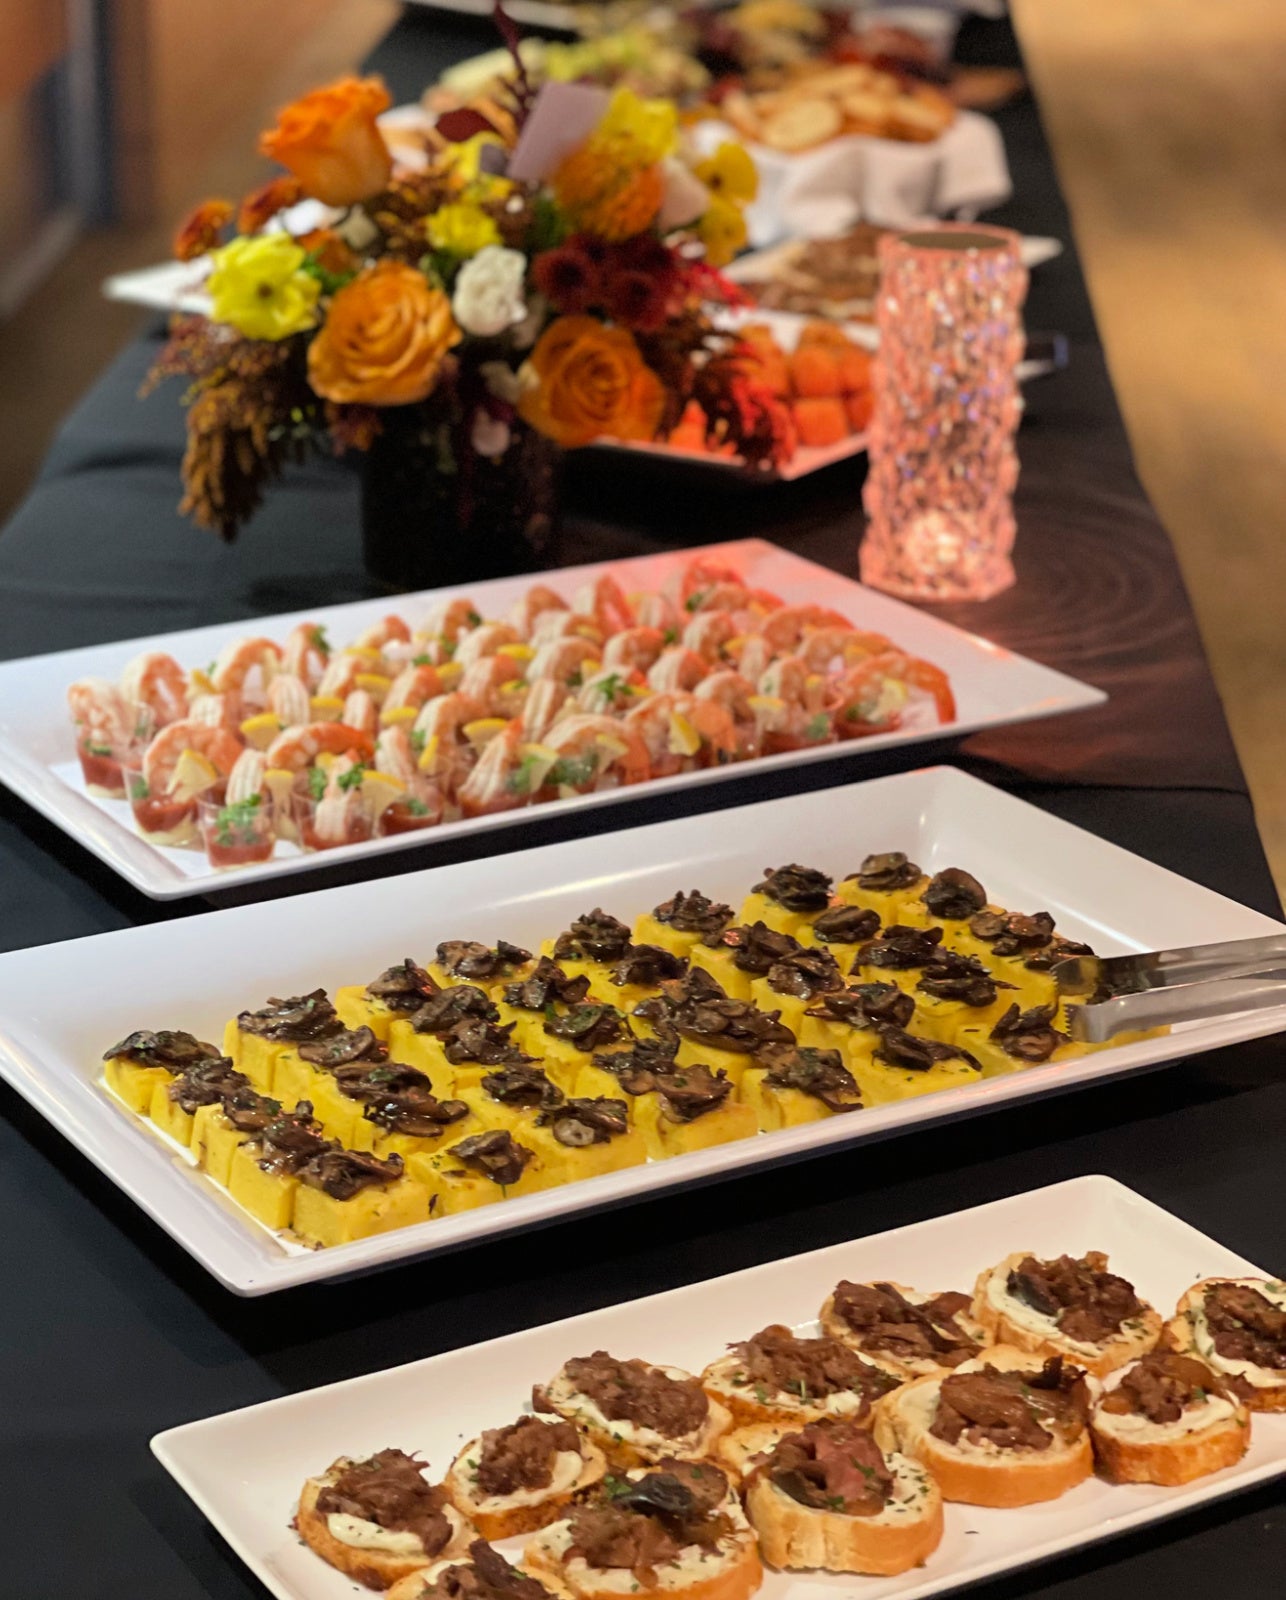 Shef Madres catering a wedding event with appetizer platters displayed on table setting